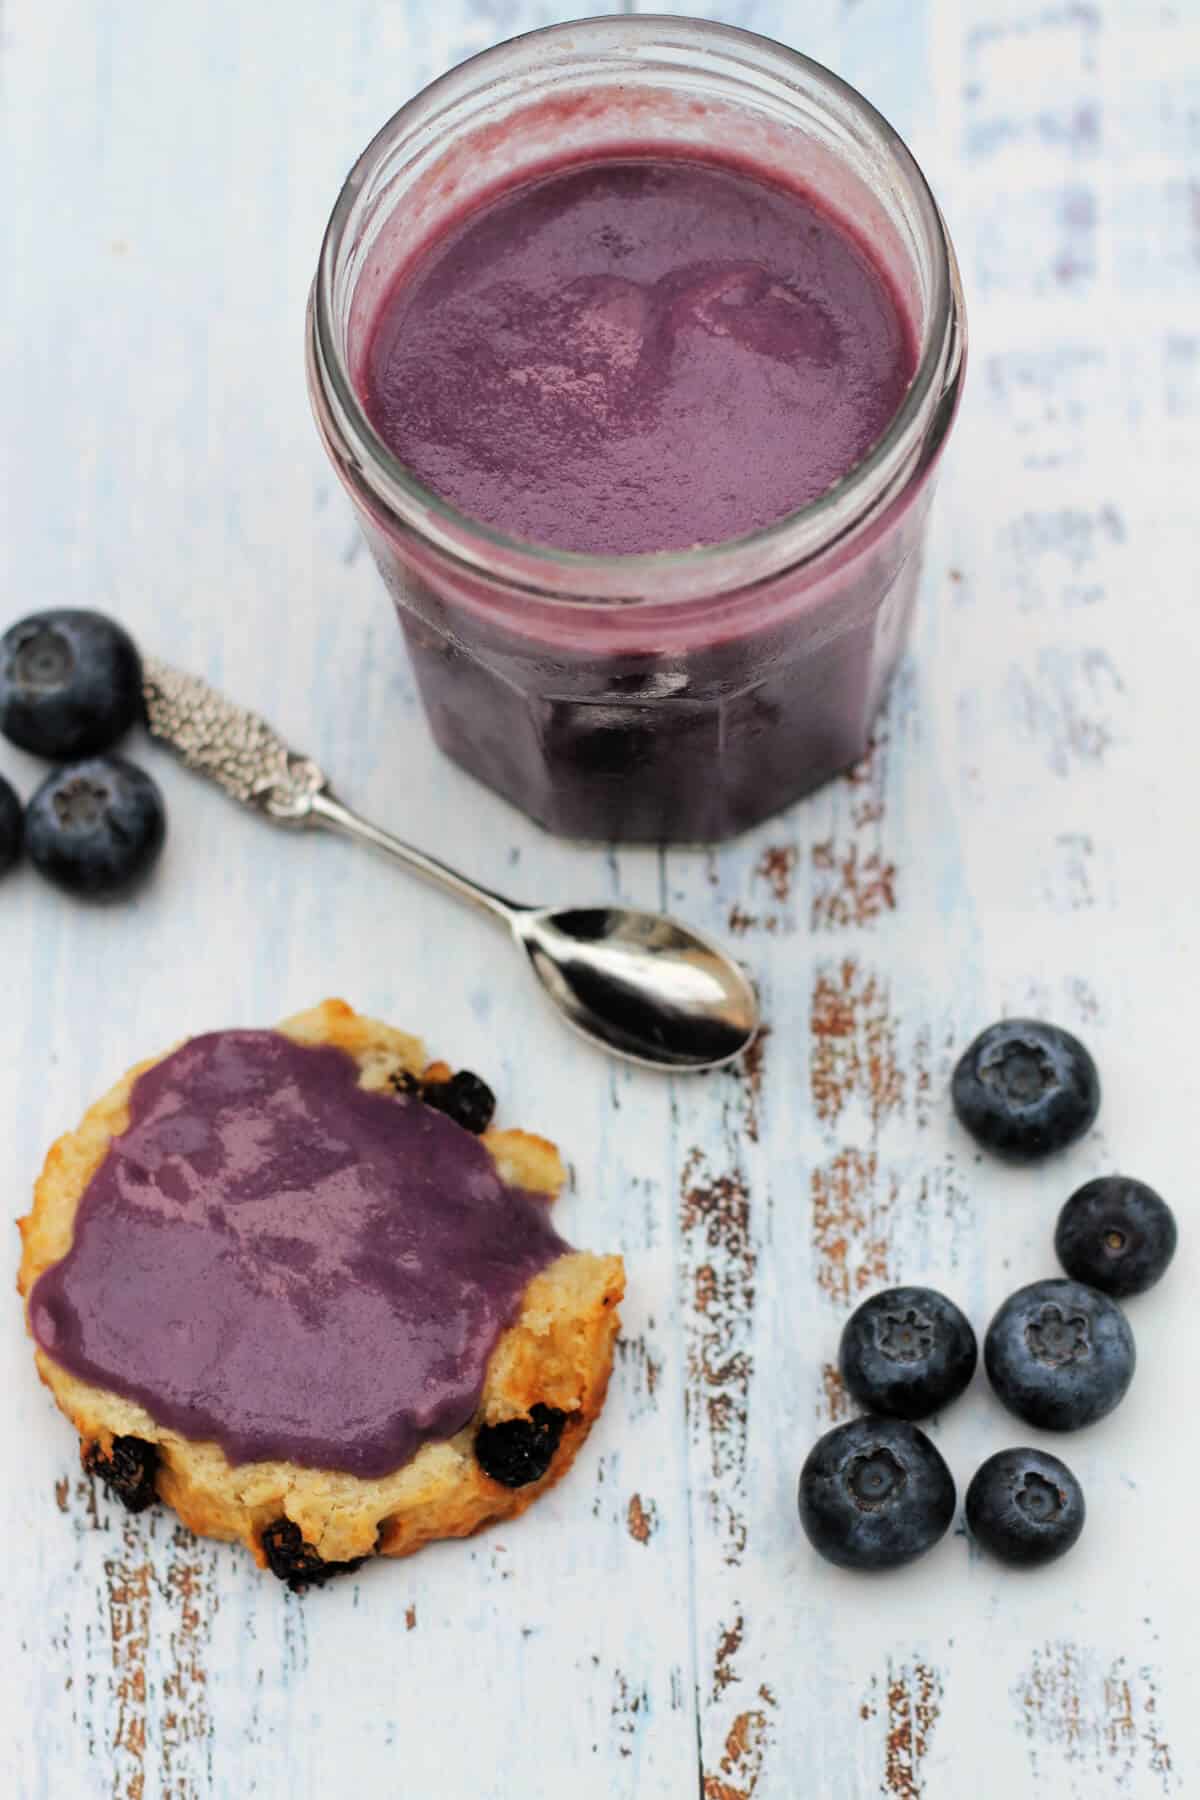 Jar of blueberry curd with a scone spread with curd, ornate spoon and blueberries next to it.